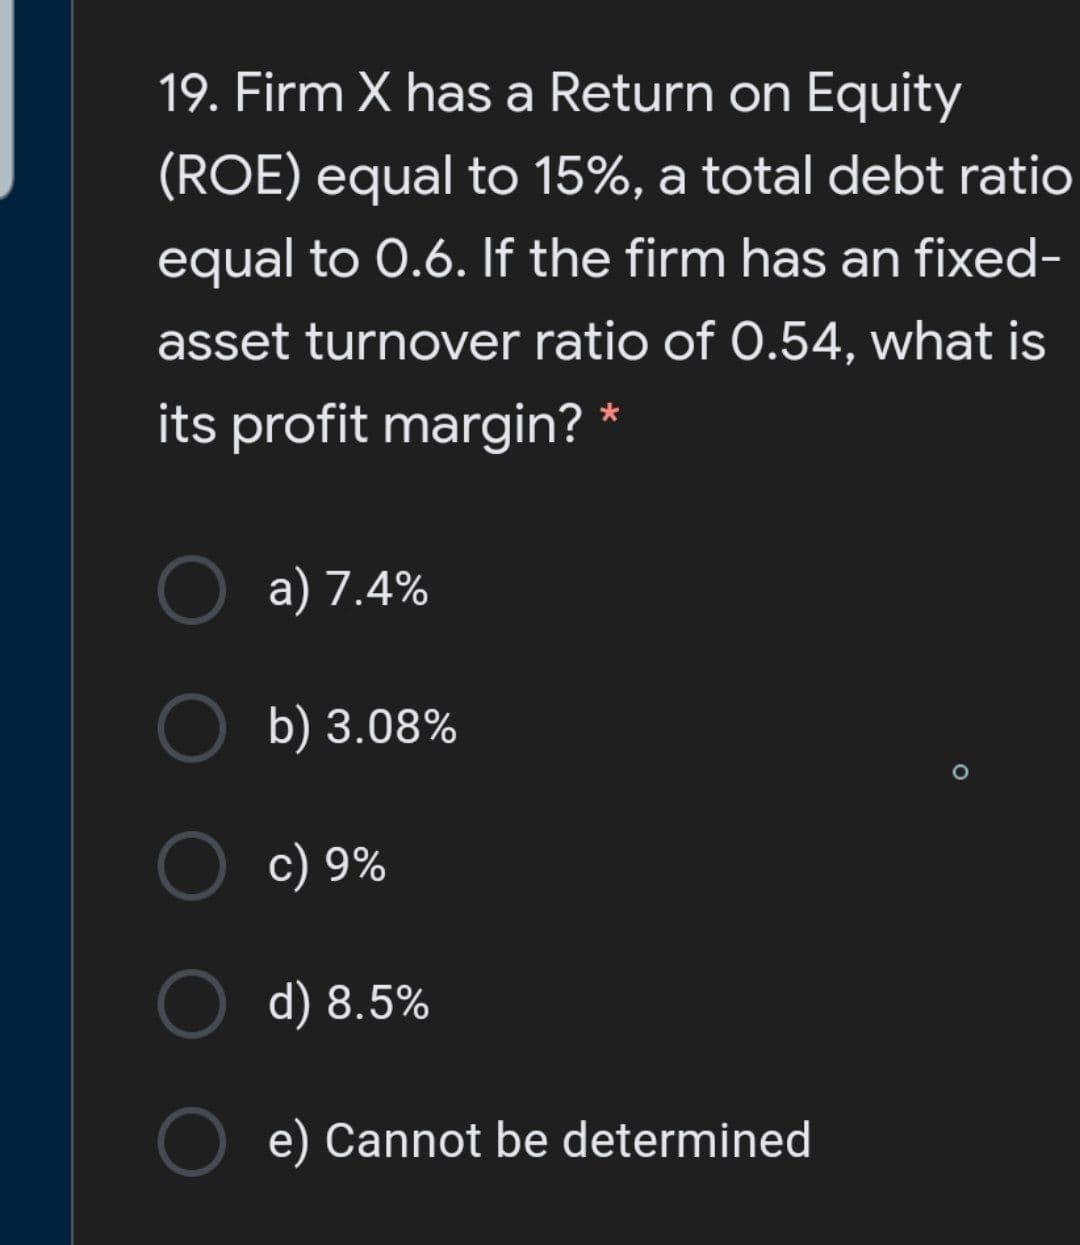 19. Firm X has a Return on Equity
(ROE) equal to 15%, a total debt ratio
equal to 0.6. If the firm has an fixed-
asset turnover ratio of 0.54, what is
its profit margin? *
a) 7.4%
b) 3.08%
c) 9%
d) 8.5%
e) Cannot be determined
